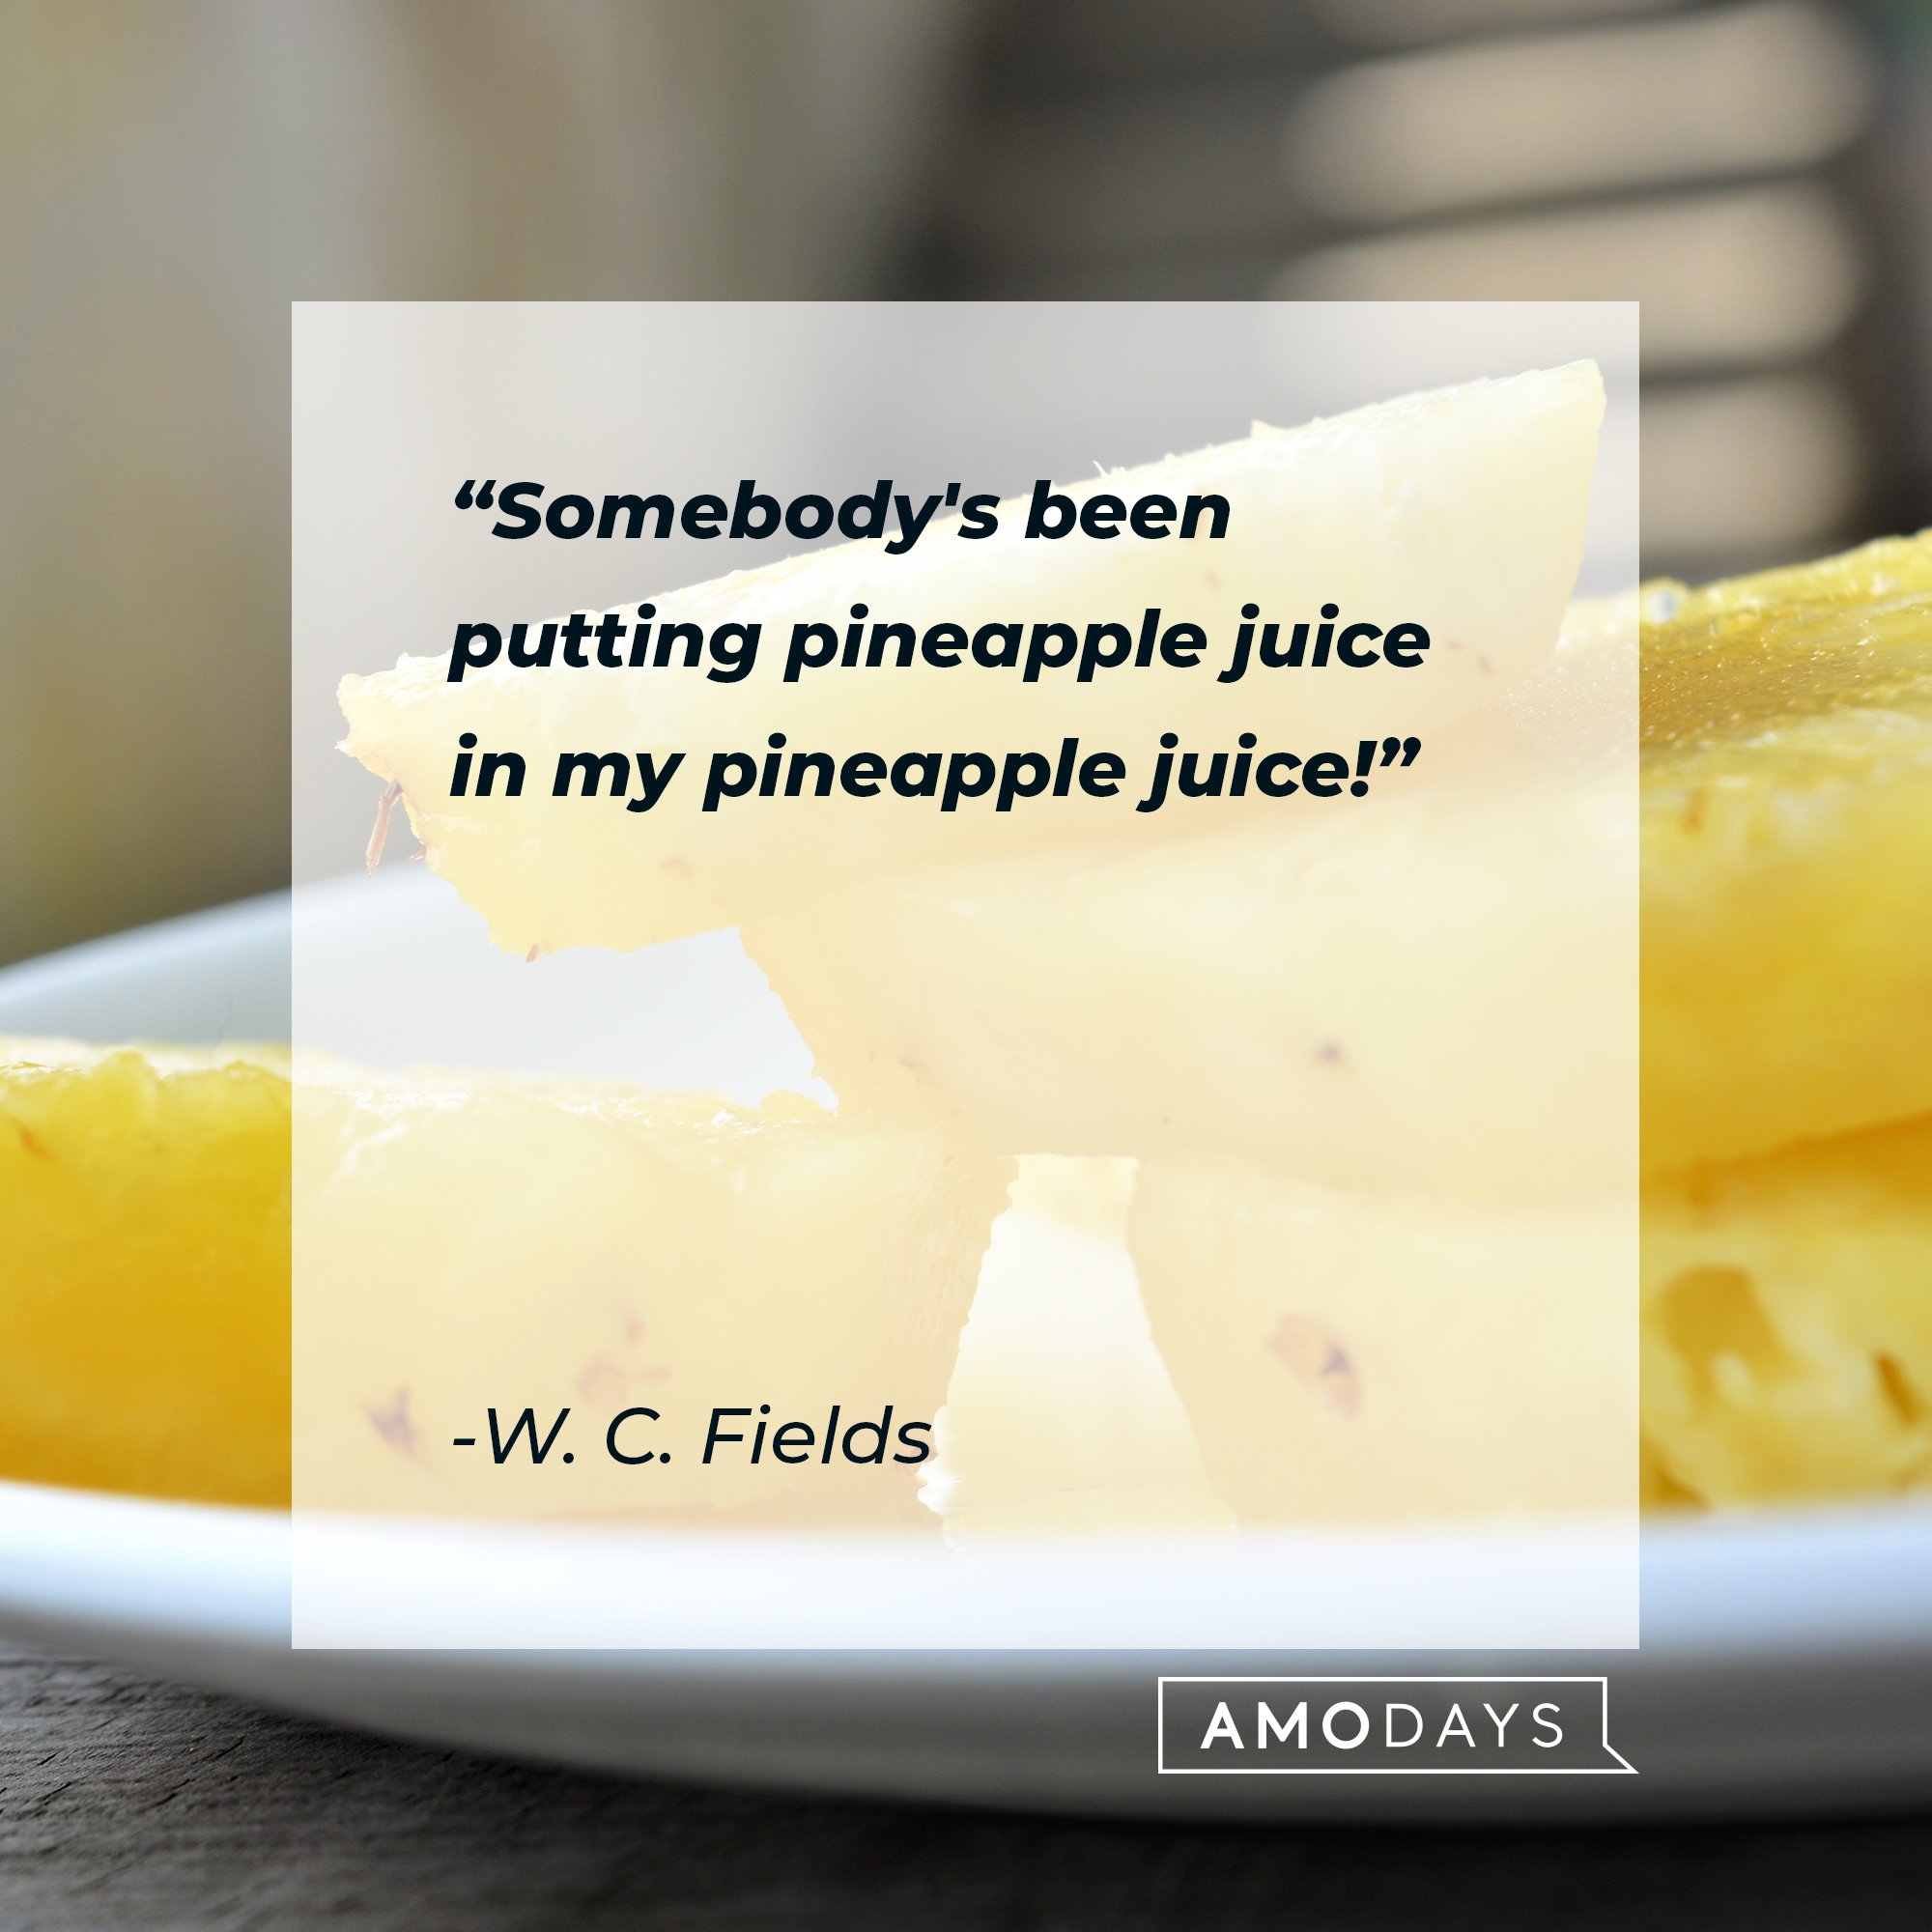 W. C. Fields' quote: "Somebody's been putting pineapple juice in my pineapple juice!" | Image: AmoDays